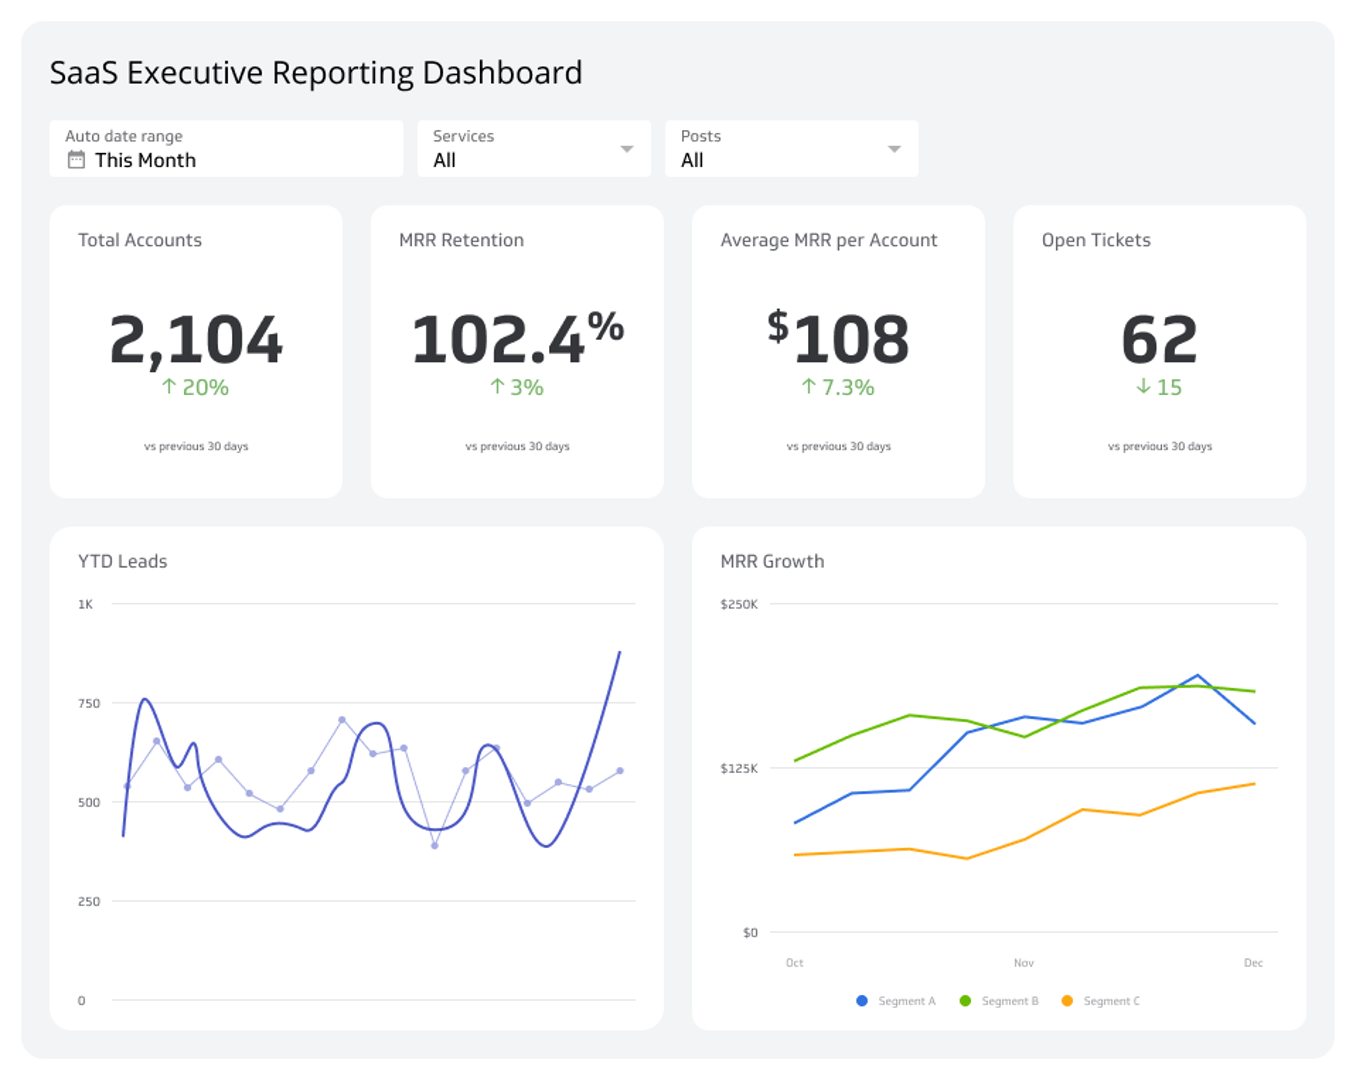 70+ dashboard examples from real companies